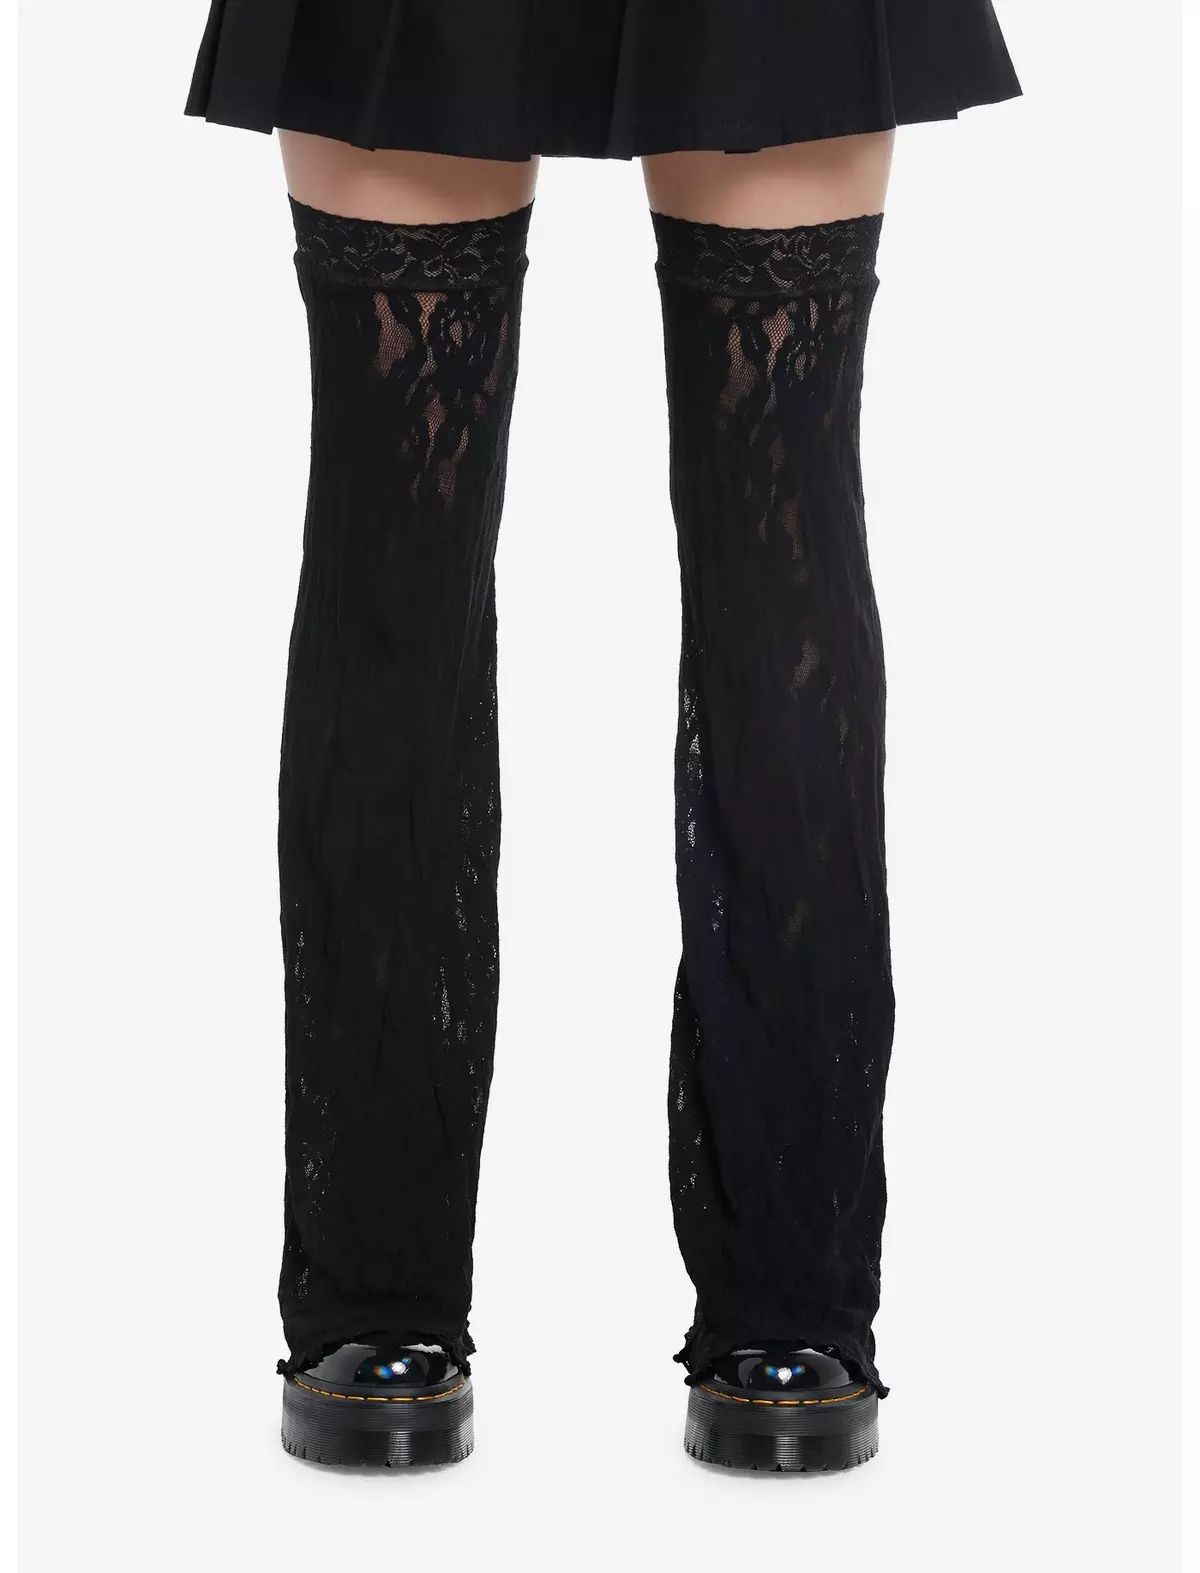 Black Floral Lace Flare Leg Warmers | Hot Topic | Hot Topic